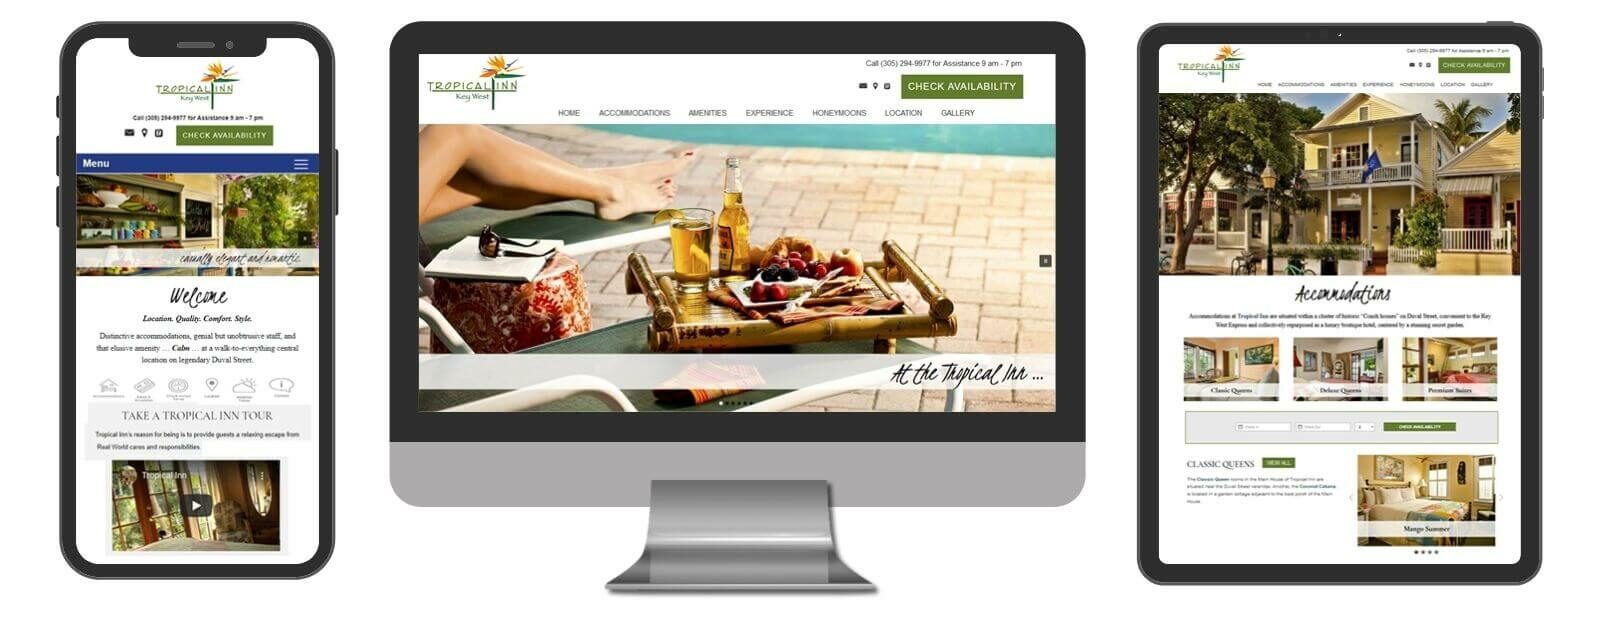 Tropical Inn website displayed in 3 sizes - mobile, template and desktop